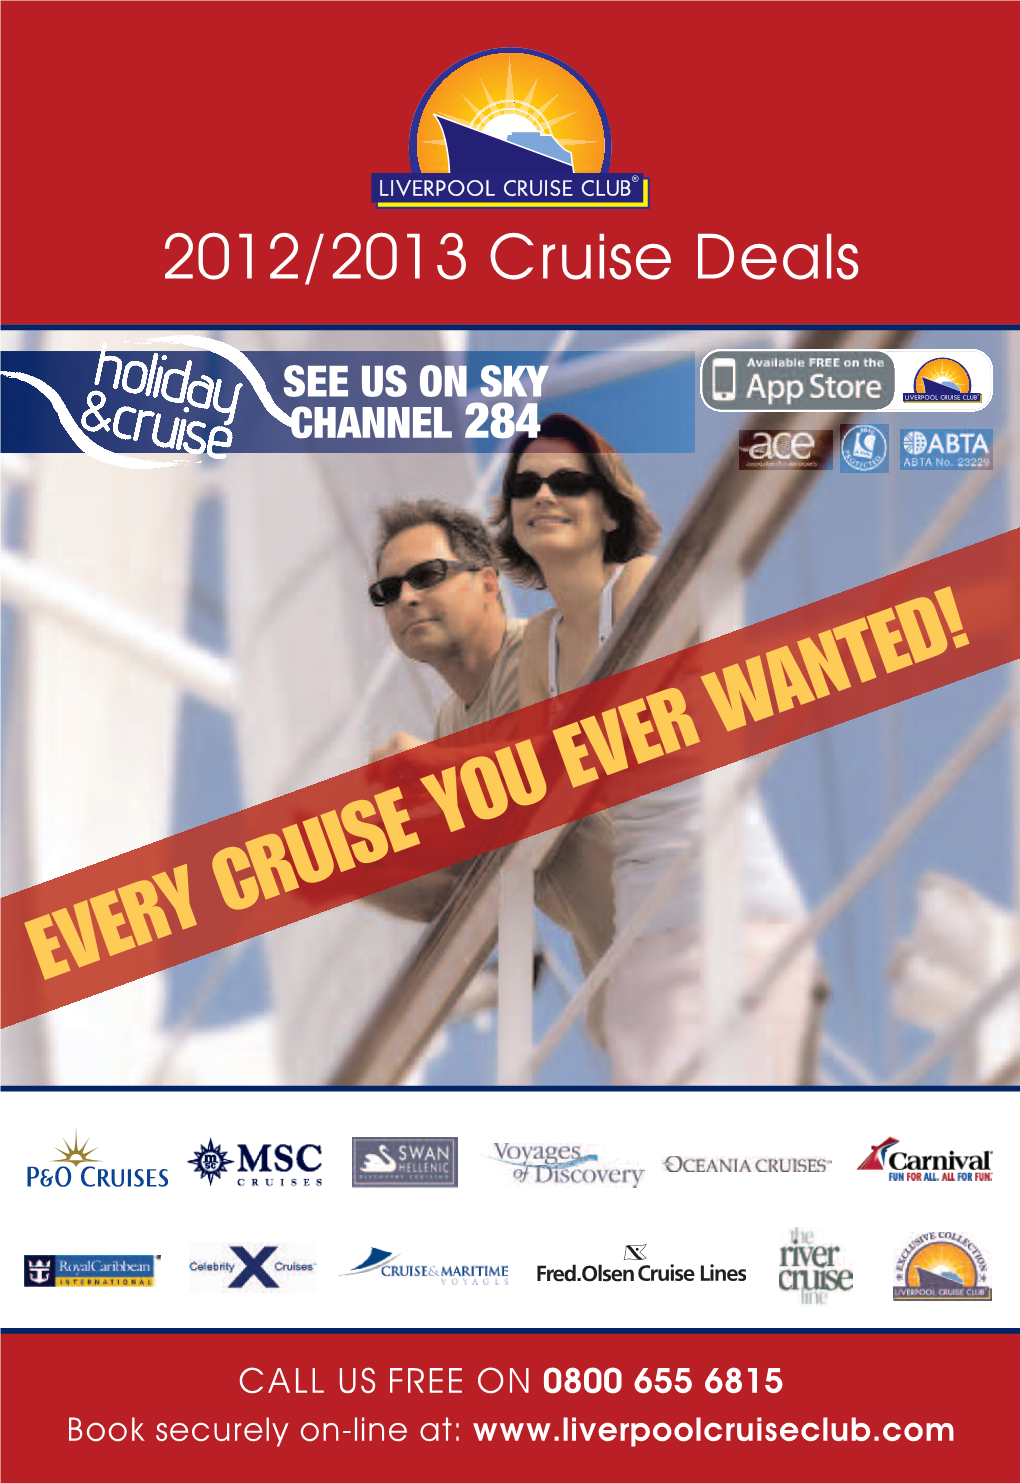 Every Cruise You Ever Wanted!